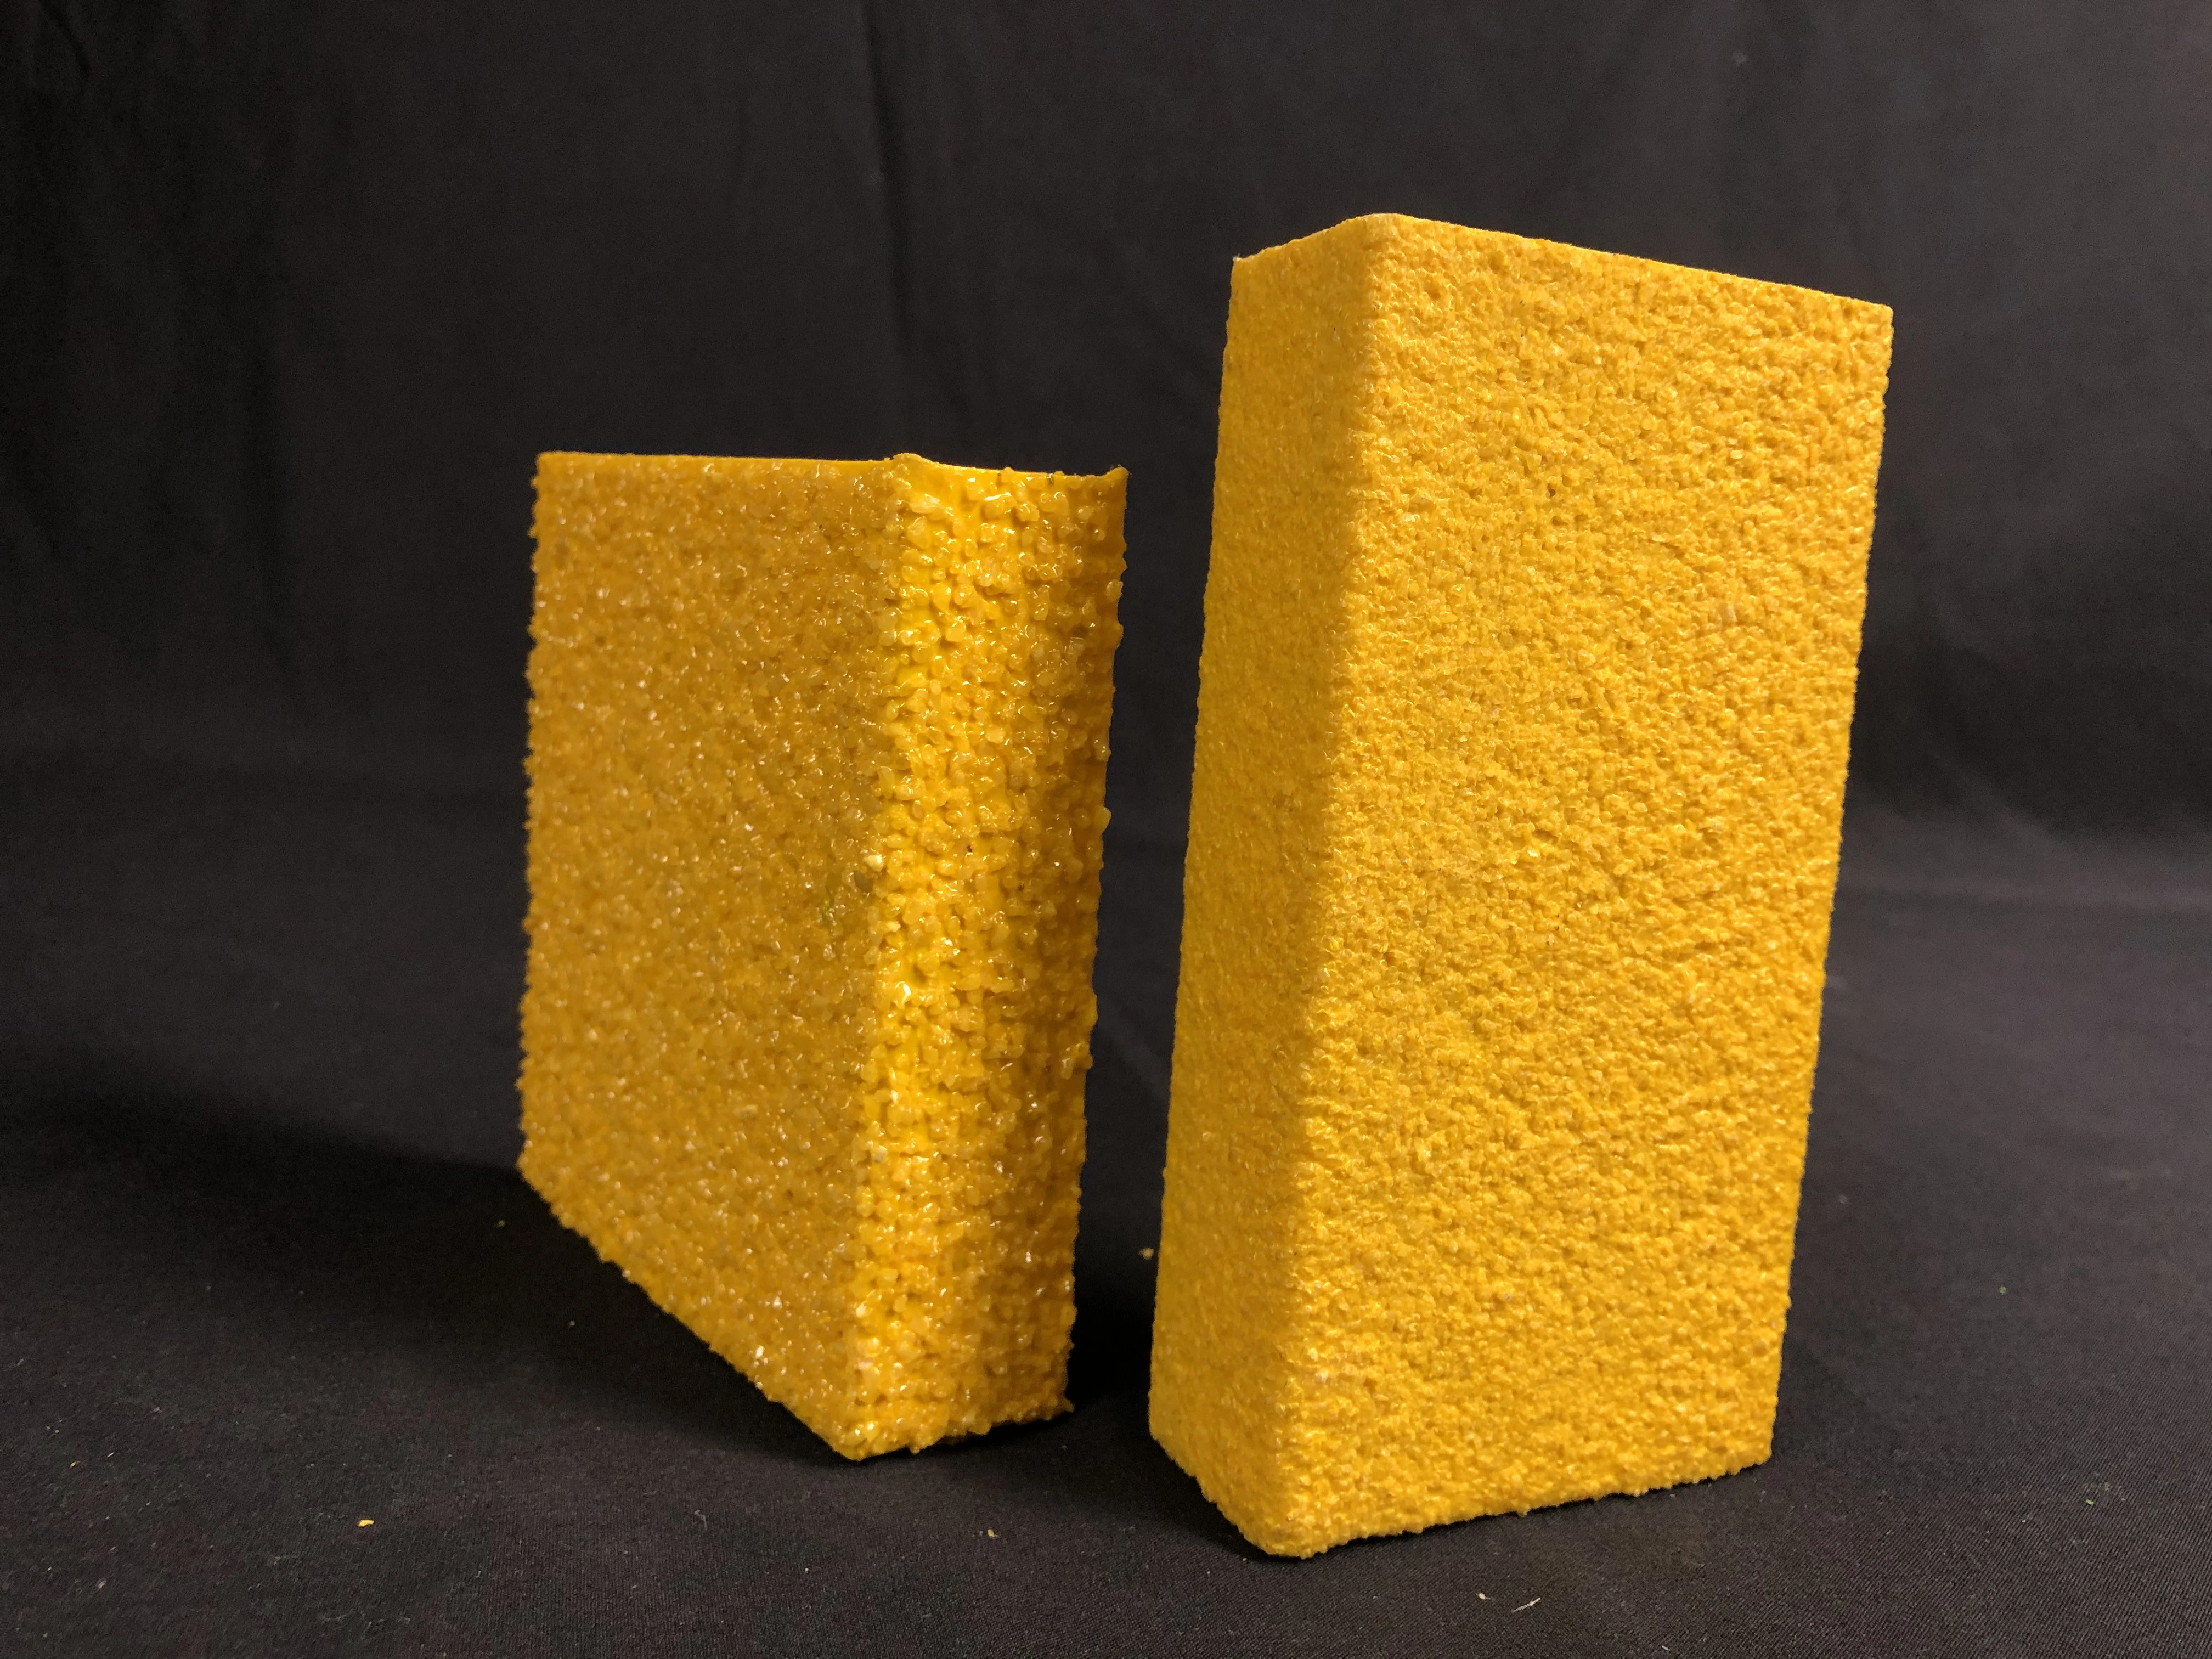 Hot selling high quality frp yellow grit frp grating for stair treads